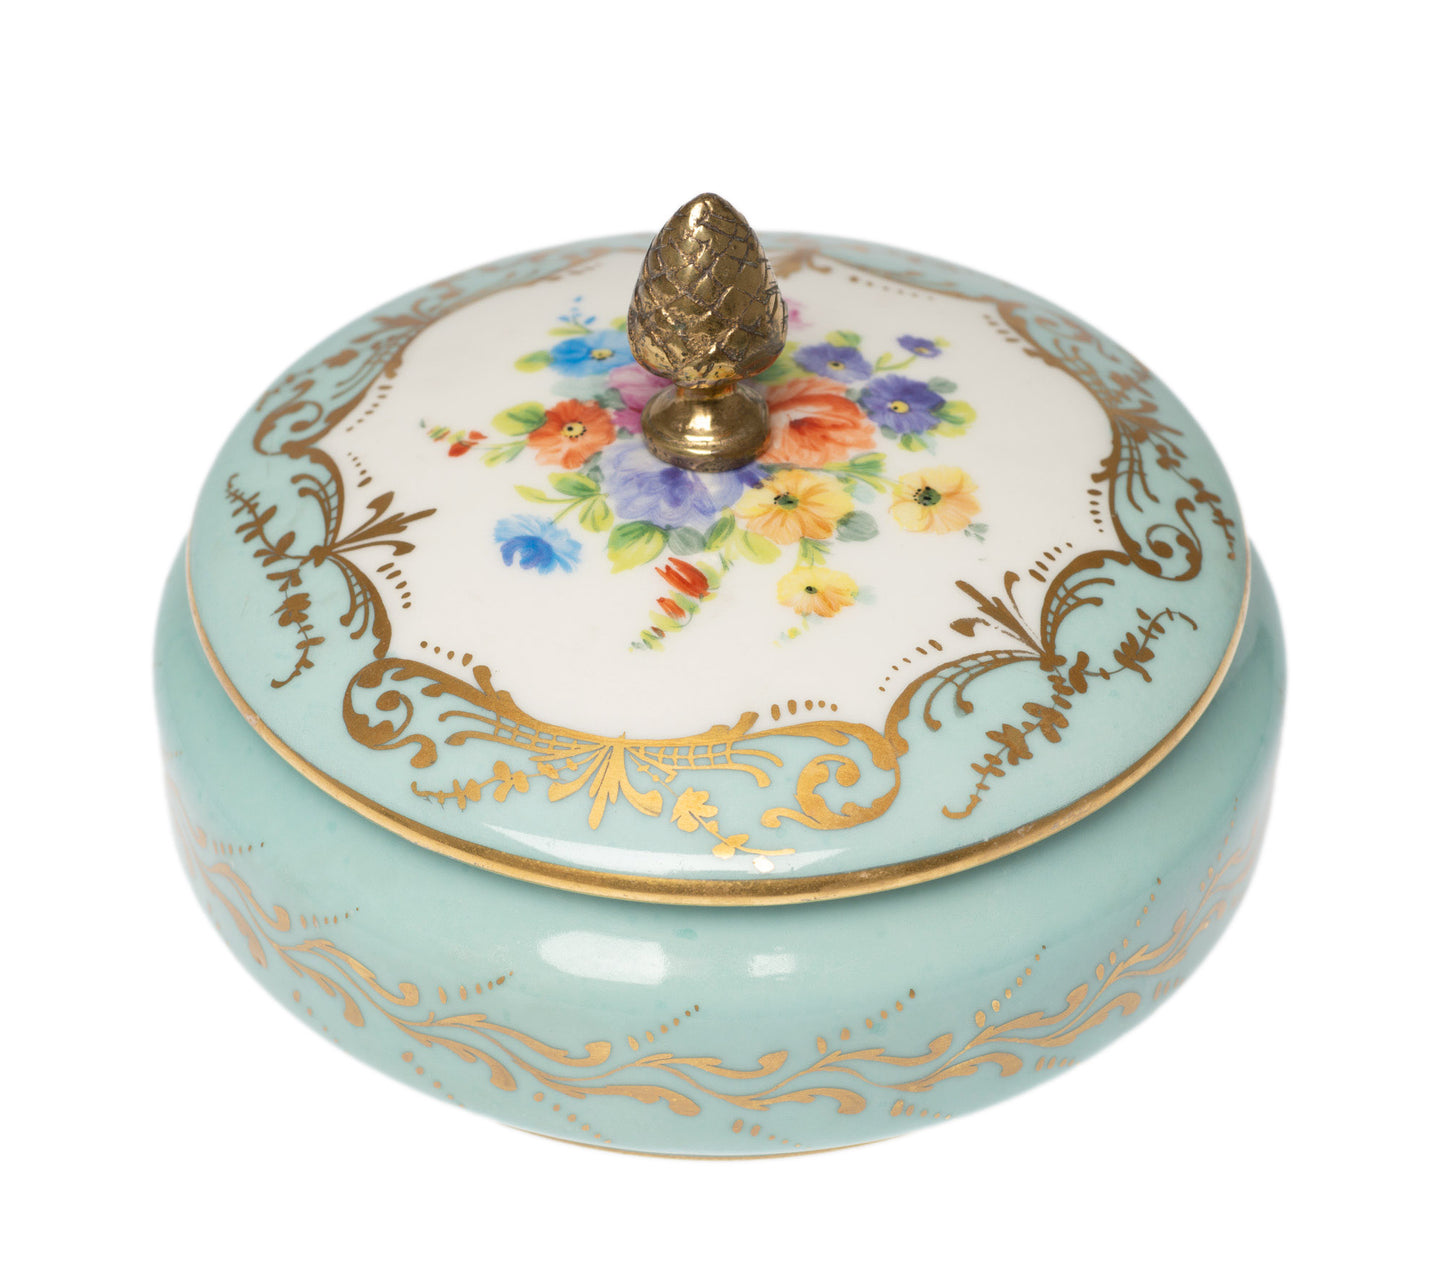 Atelier Camille Le Tallec Limoges Porcelain Hand Painted Lidded Jar - Turquoise (Code 2549)